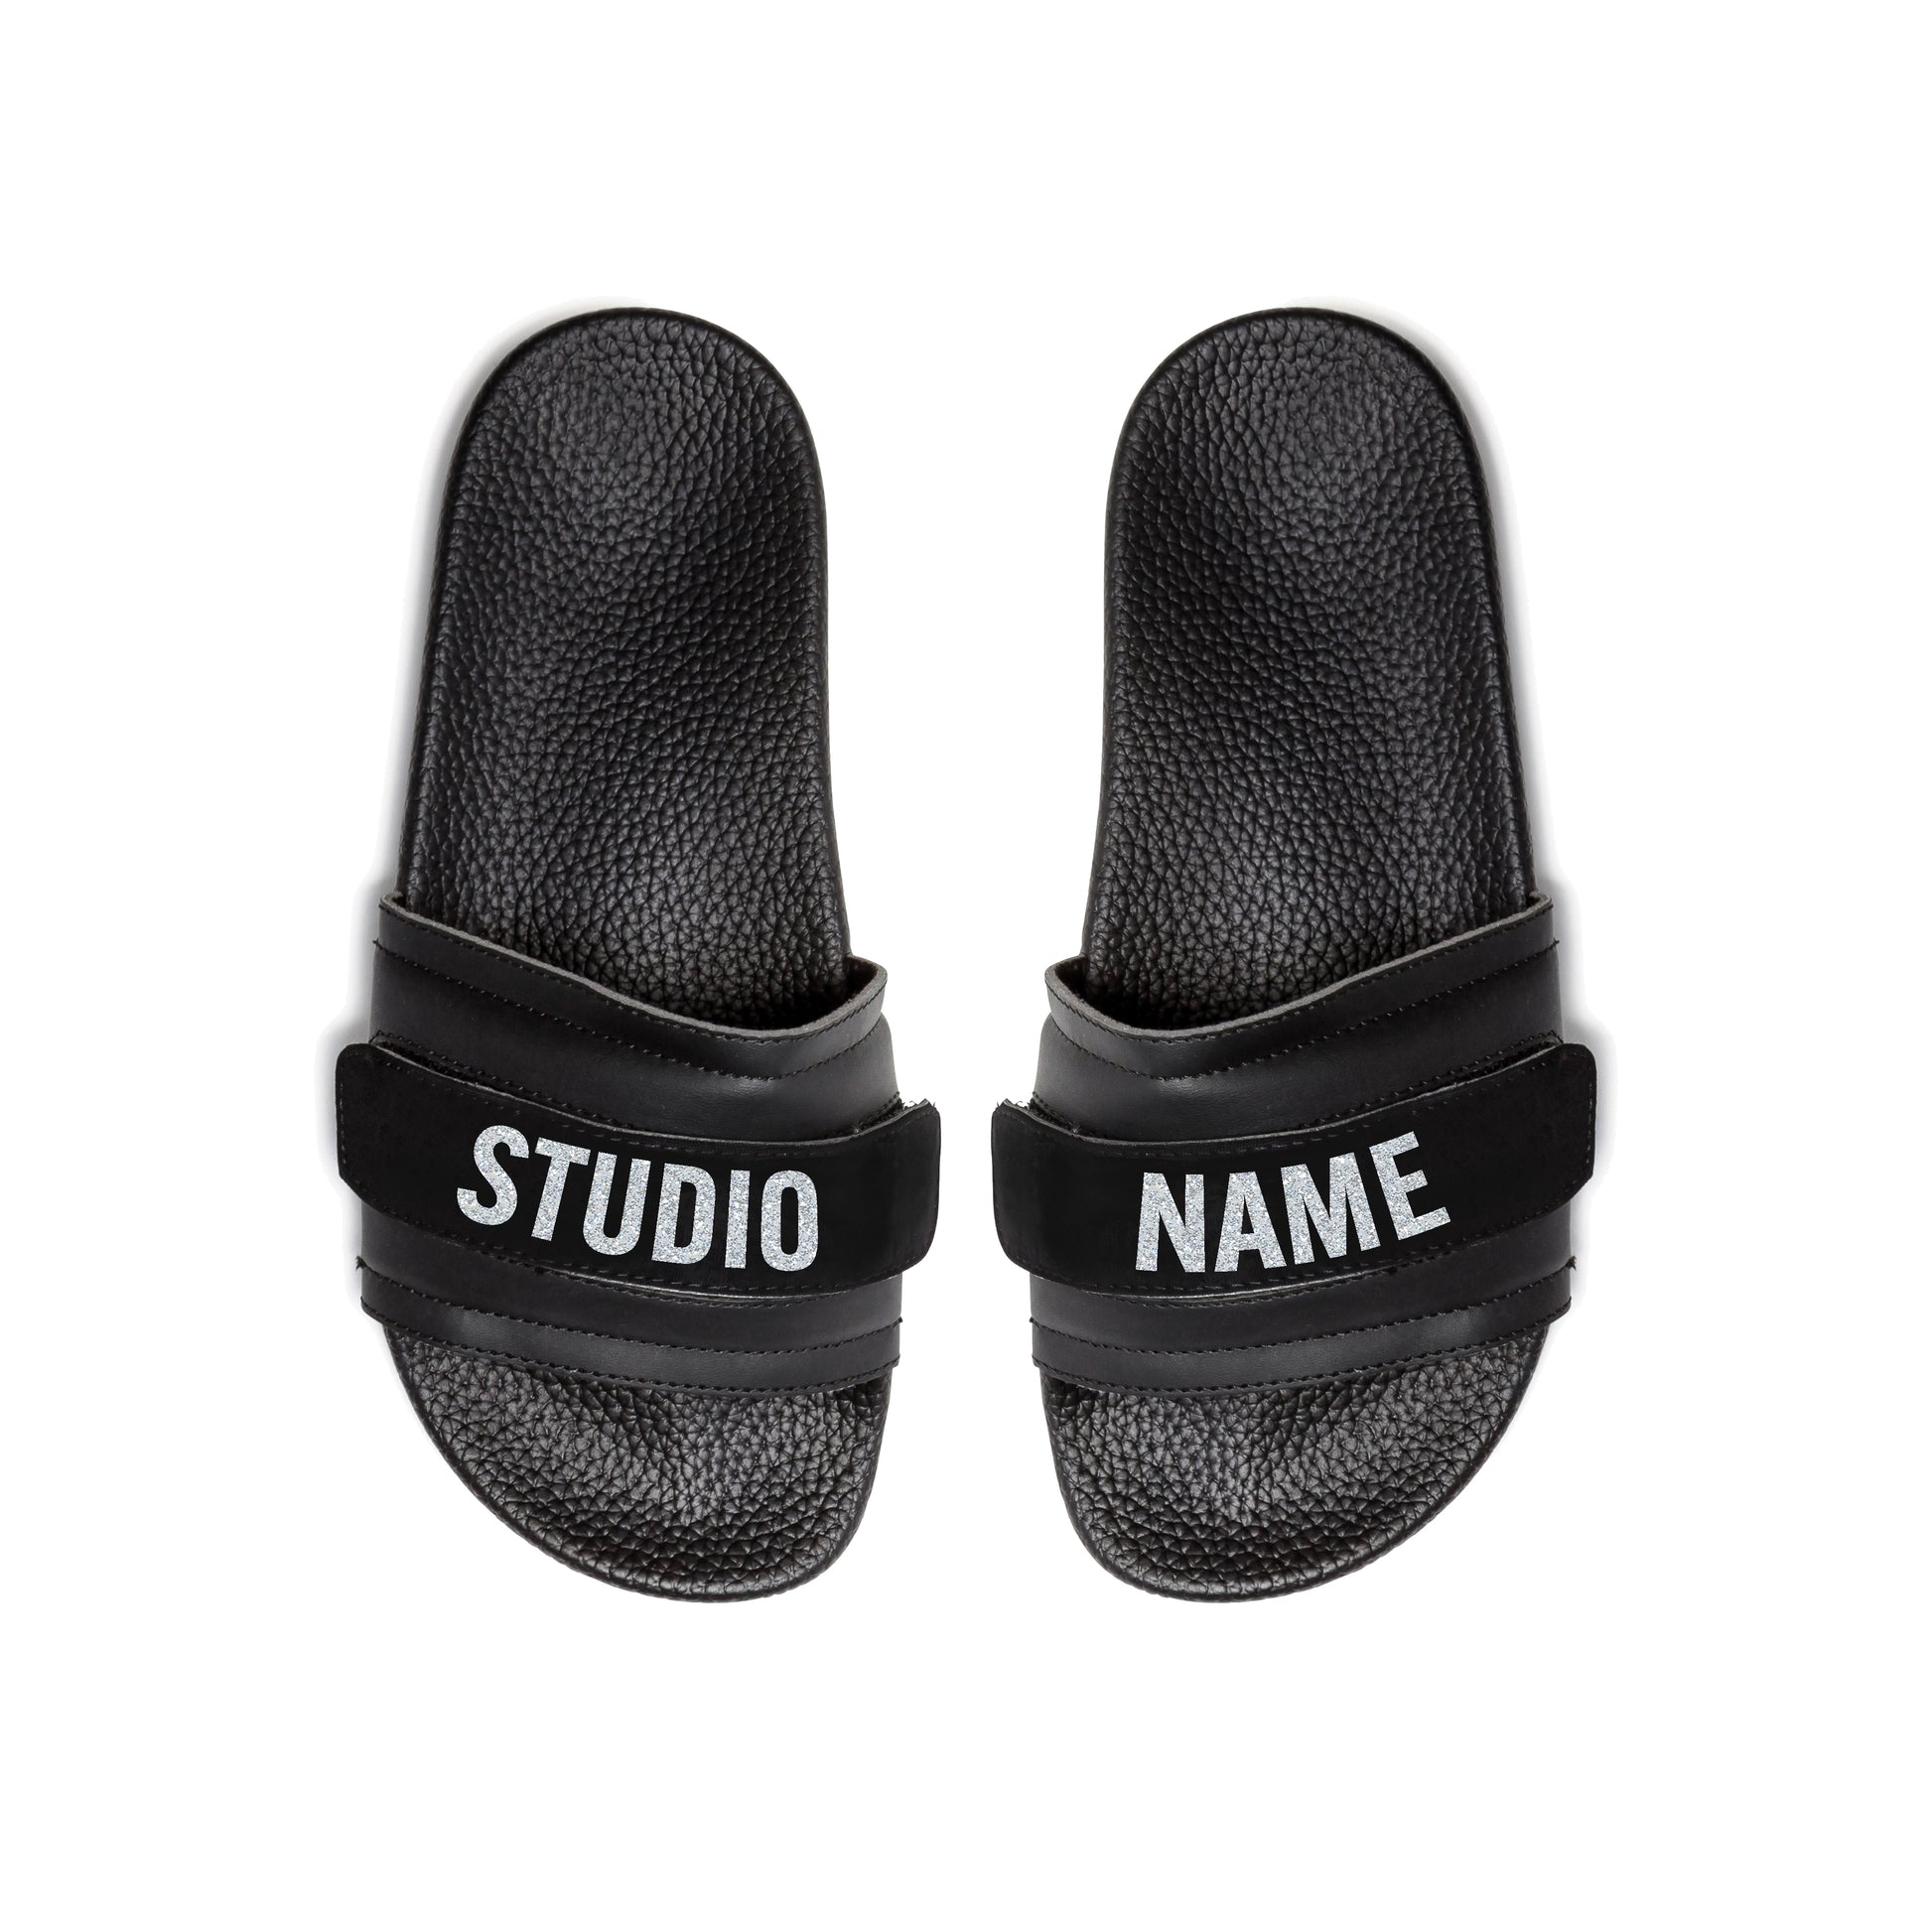 Pair of Pastry Adult Women's Recovery Slide in Black with Studio Name Strap top view